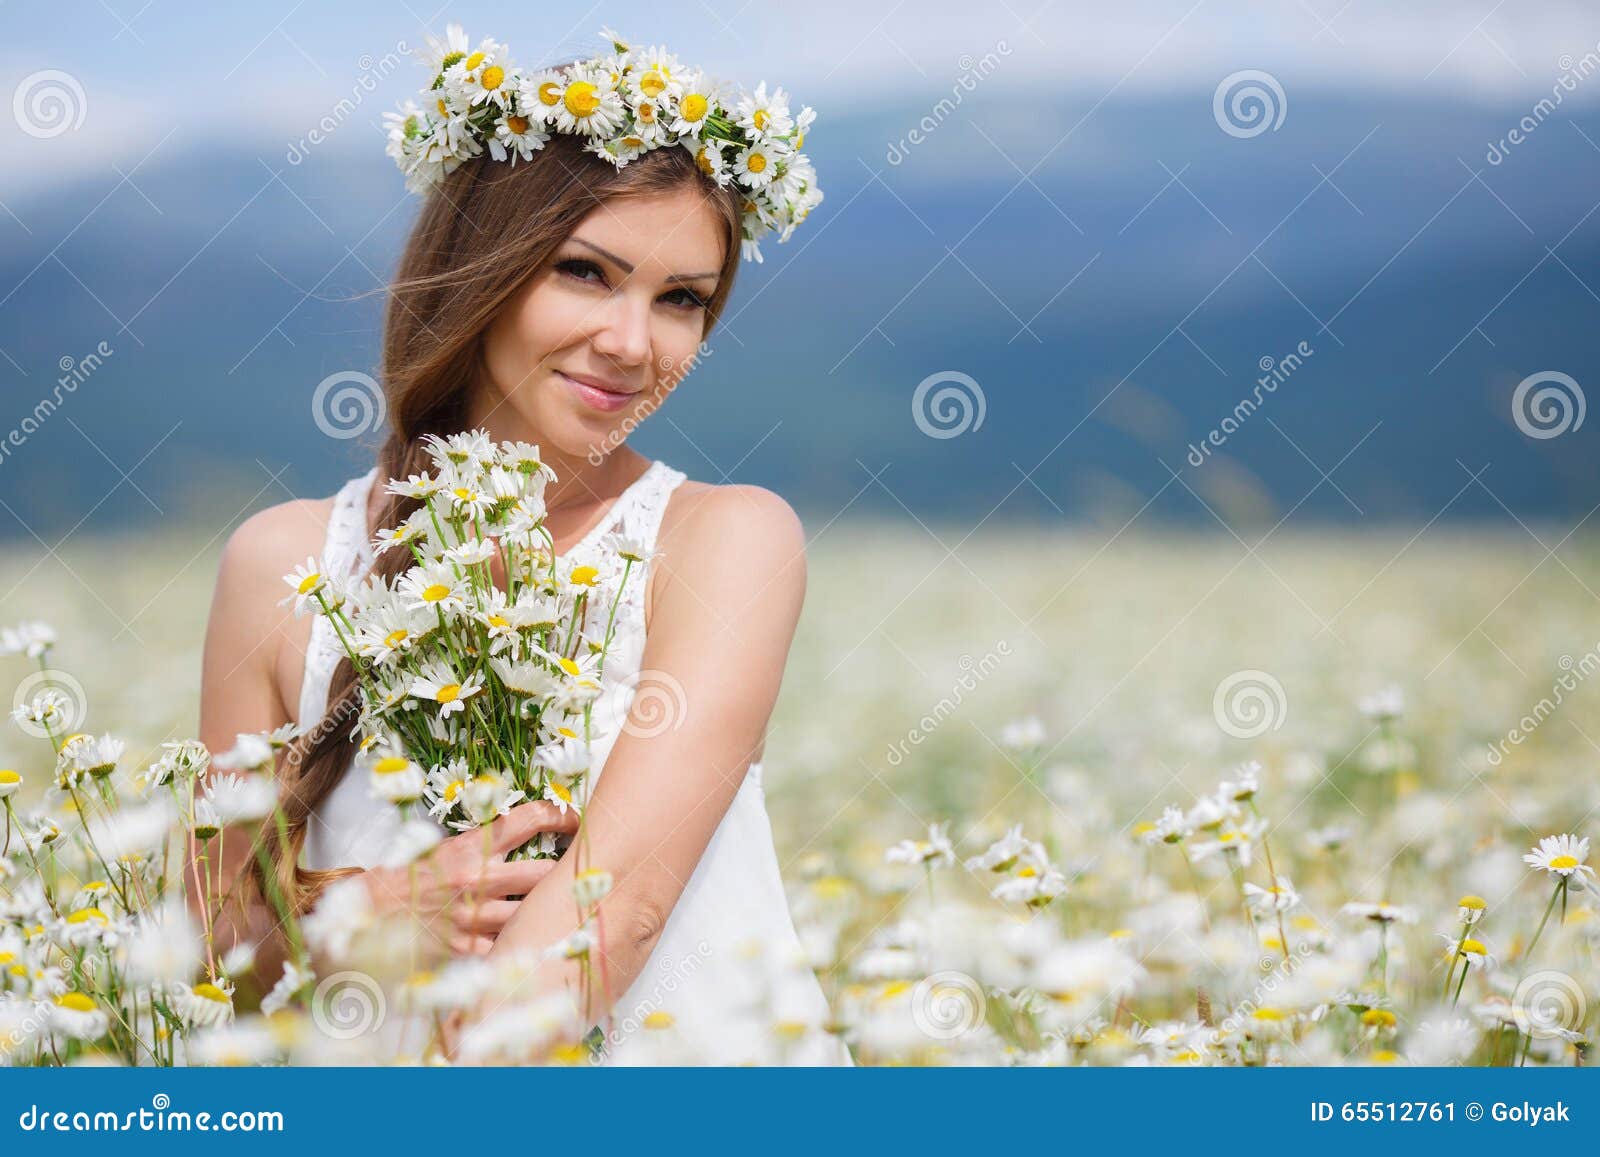 Young Woman in a Field of Blooming Daisies Stock Image - Image of bloom ...